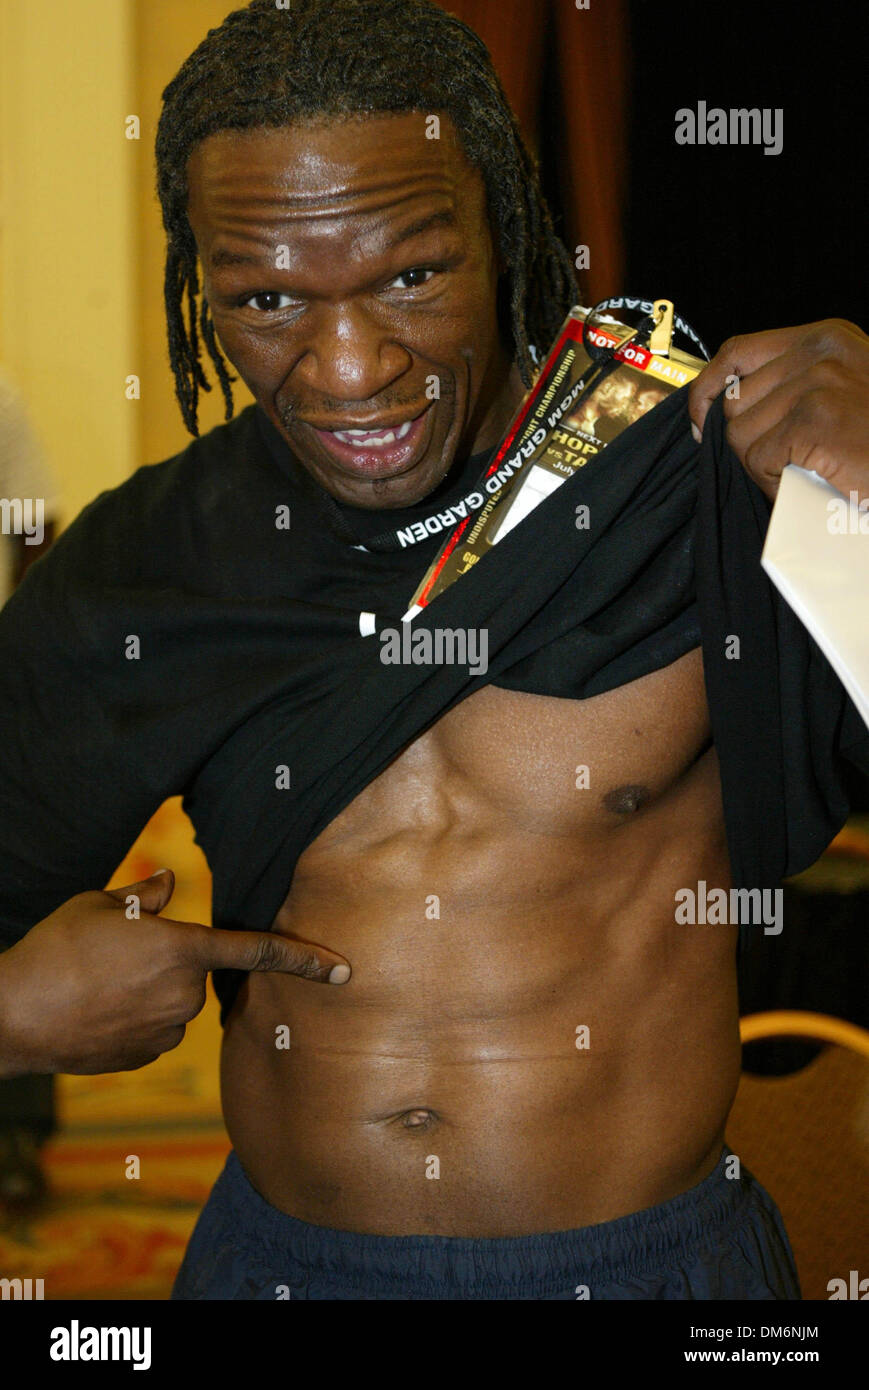 Jul 16, 2005; Las Vegas, NV, USA; Famous Boxing trainer FLOYD JOY MAYWEATHER  52 years old, shows off his abs of steele at The Parade Of Champions Press  conference at the MGM